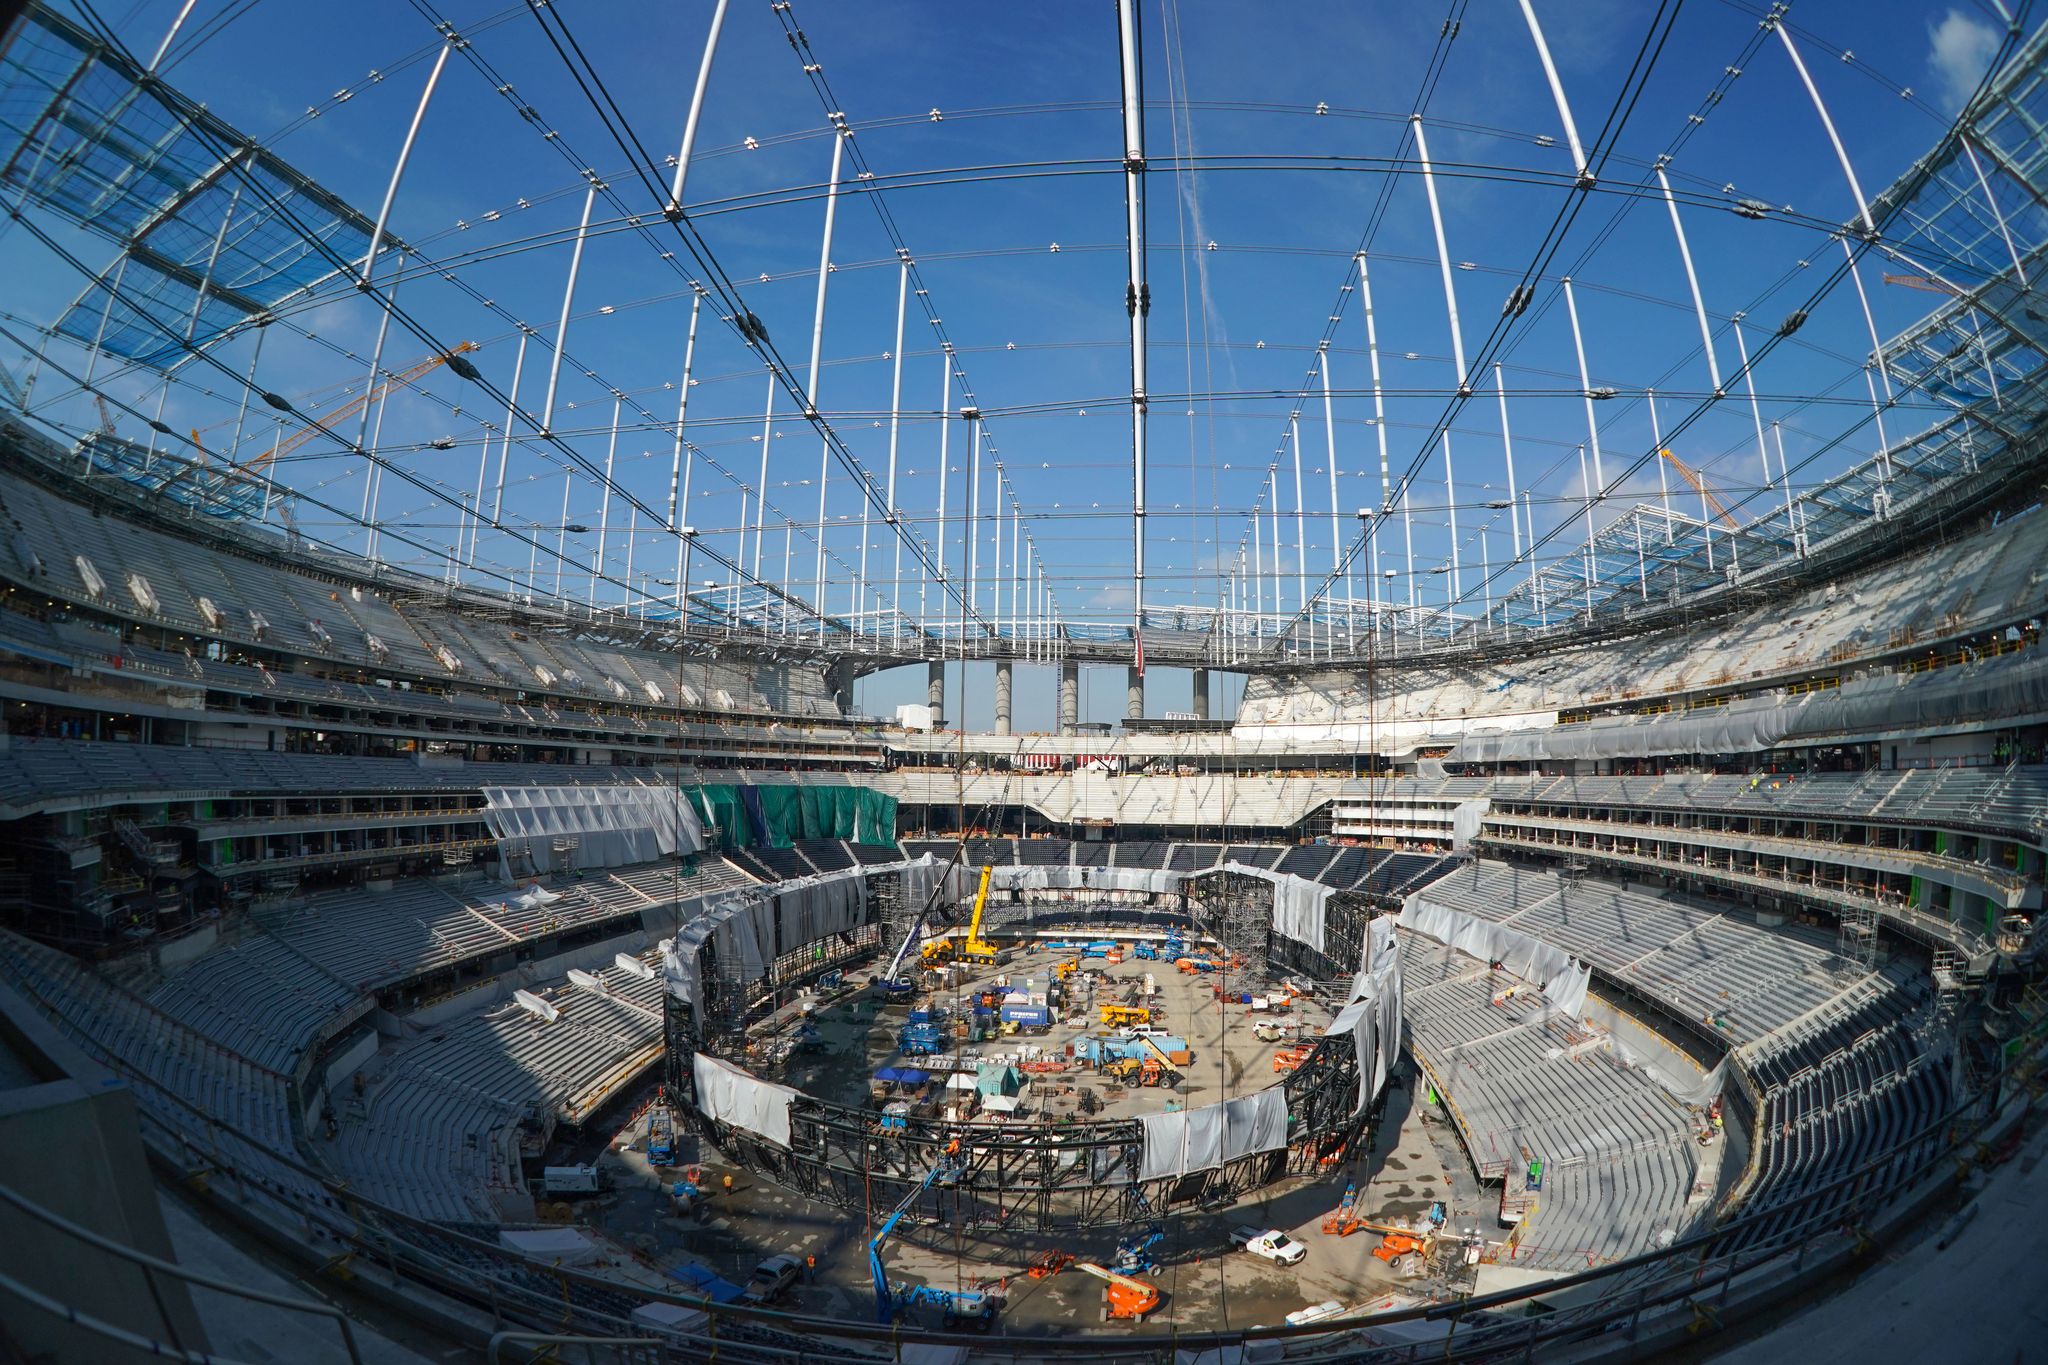 inglewood, ca   january 22 the giant oculus 2 sided video board is being assembled inside on the floor of sofi stadium as roofing panels begin to cover the entire structure as it nears completion in inglewood on wednesday, jan 22, 2020 the stadium will open in the summer photo by scott varleymedianews grouptorrance daily breeze via getty images